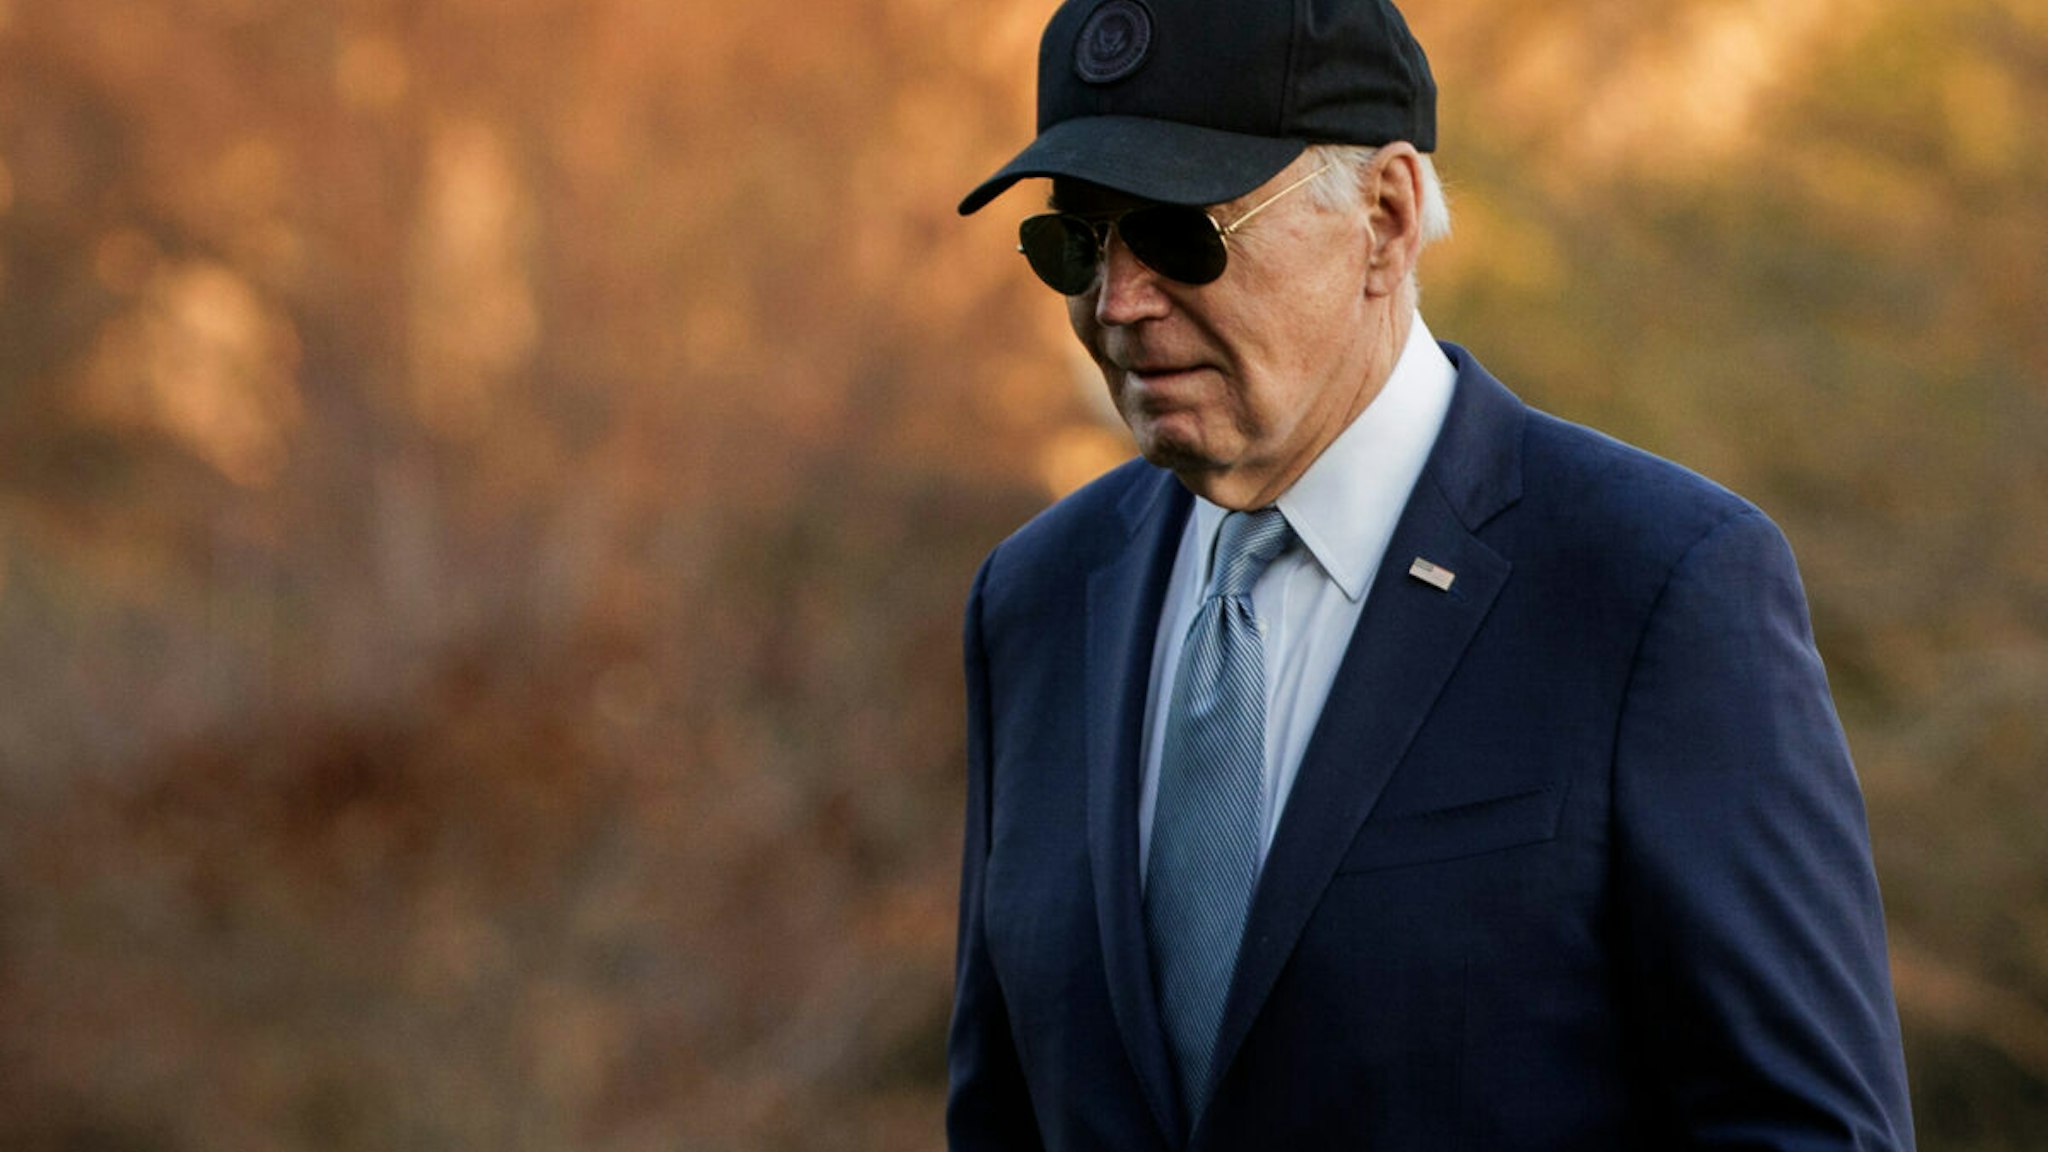 US President Joe Biden walks on the South Lawn of the White House after arriving on Marine One in Washington, DC, US, on Thursday, March 21, 2024. A lawsuit filed against President Joe Biden and the US Department of Energy in Louisiana federal court on Thursday asks a judge to overturn the temporary pause of new licenses to export natural gas via ocean-going tankers.